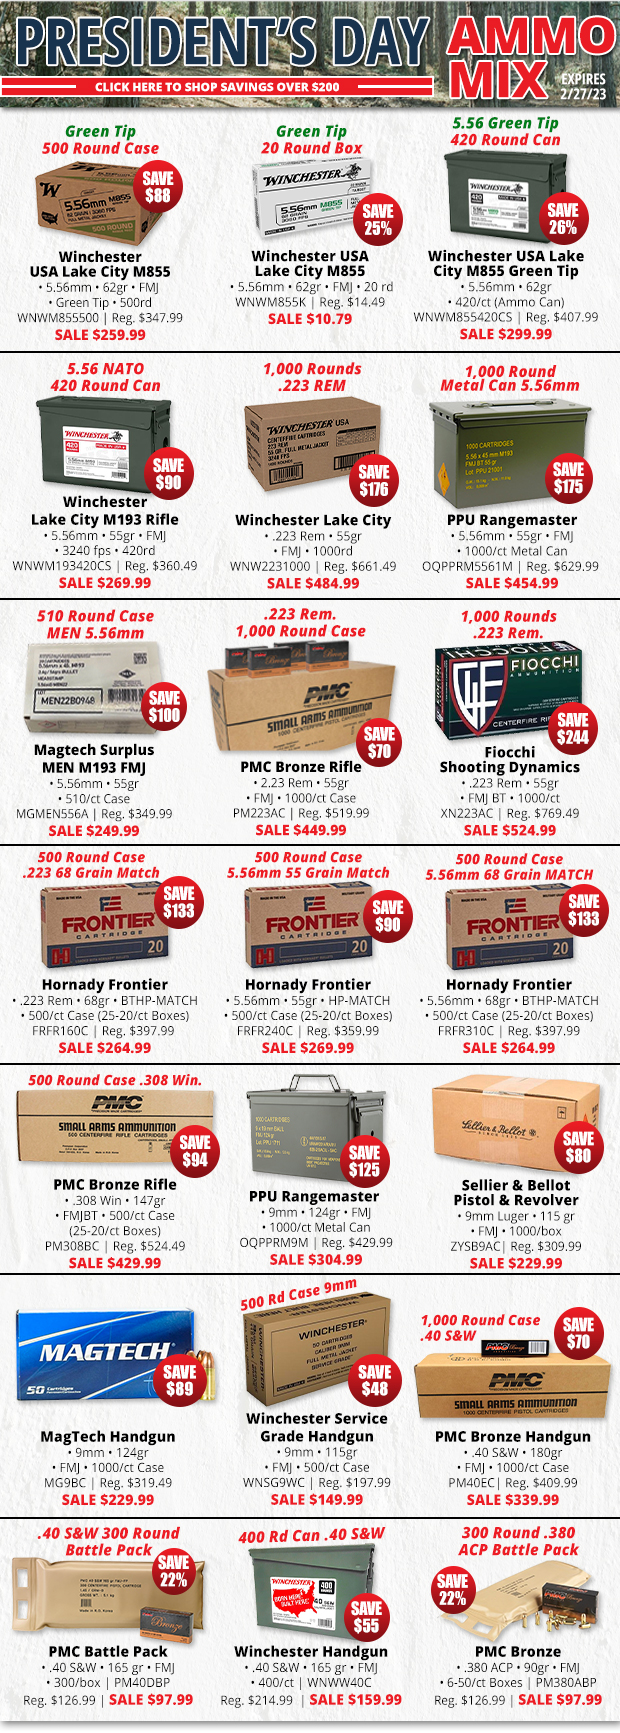 Shop Ammo Deals Up to Over $200 in Savings